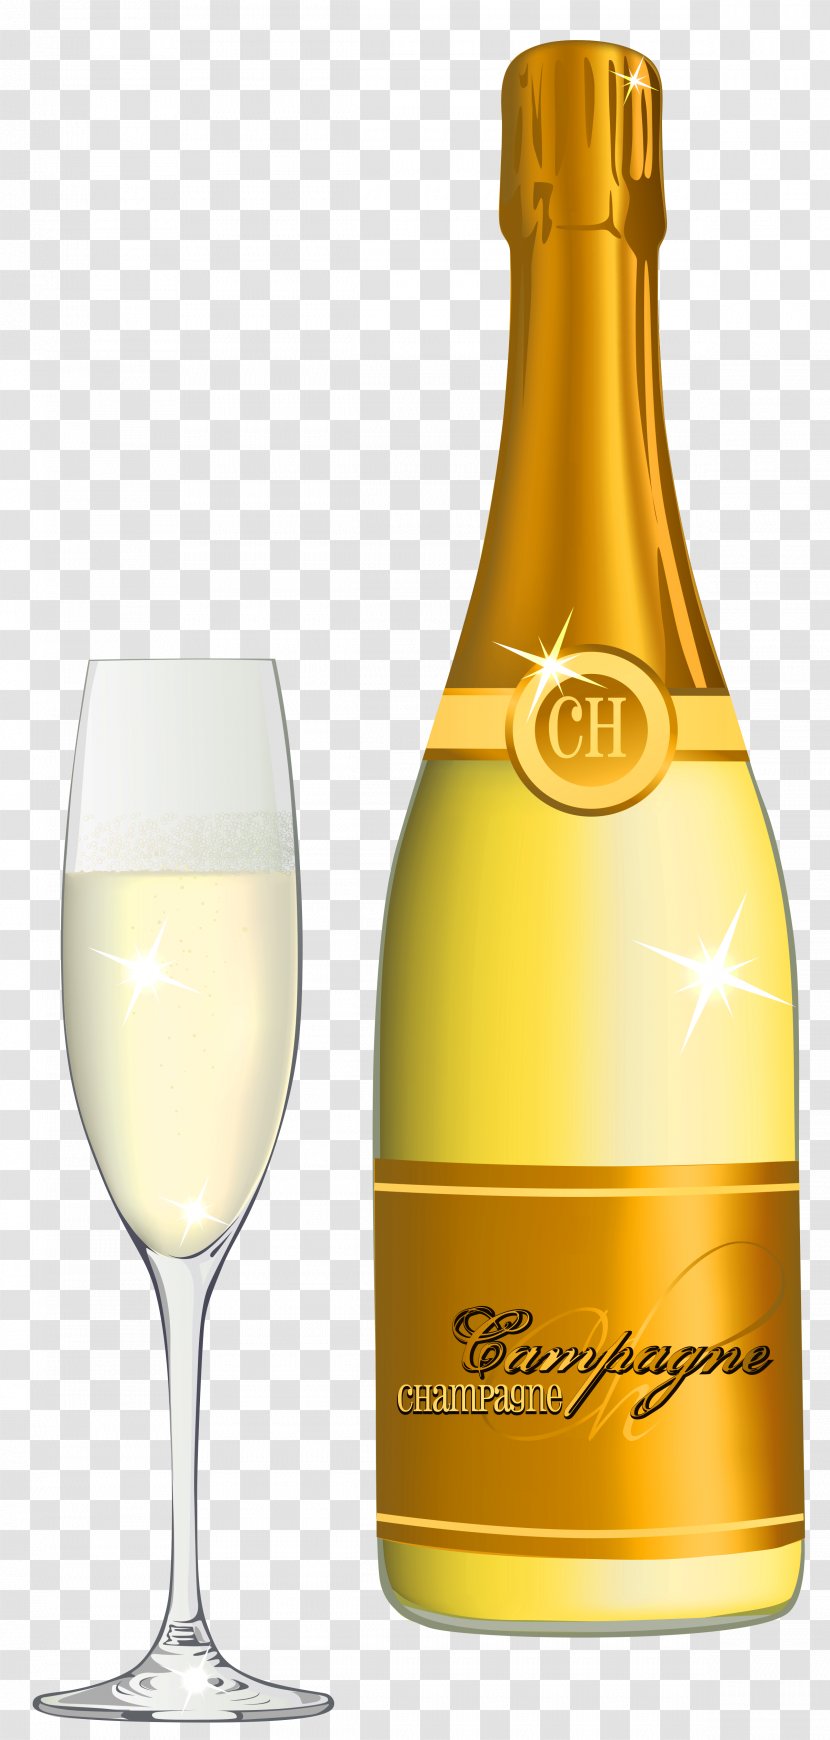 White Wine Champagne Glass - Cup Transparent PNG